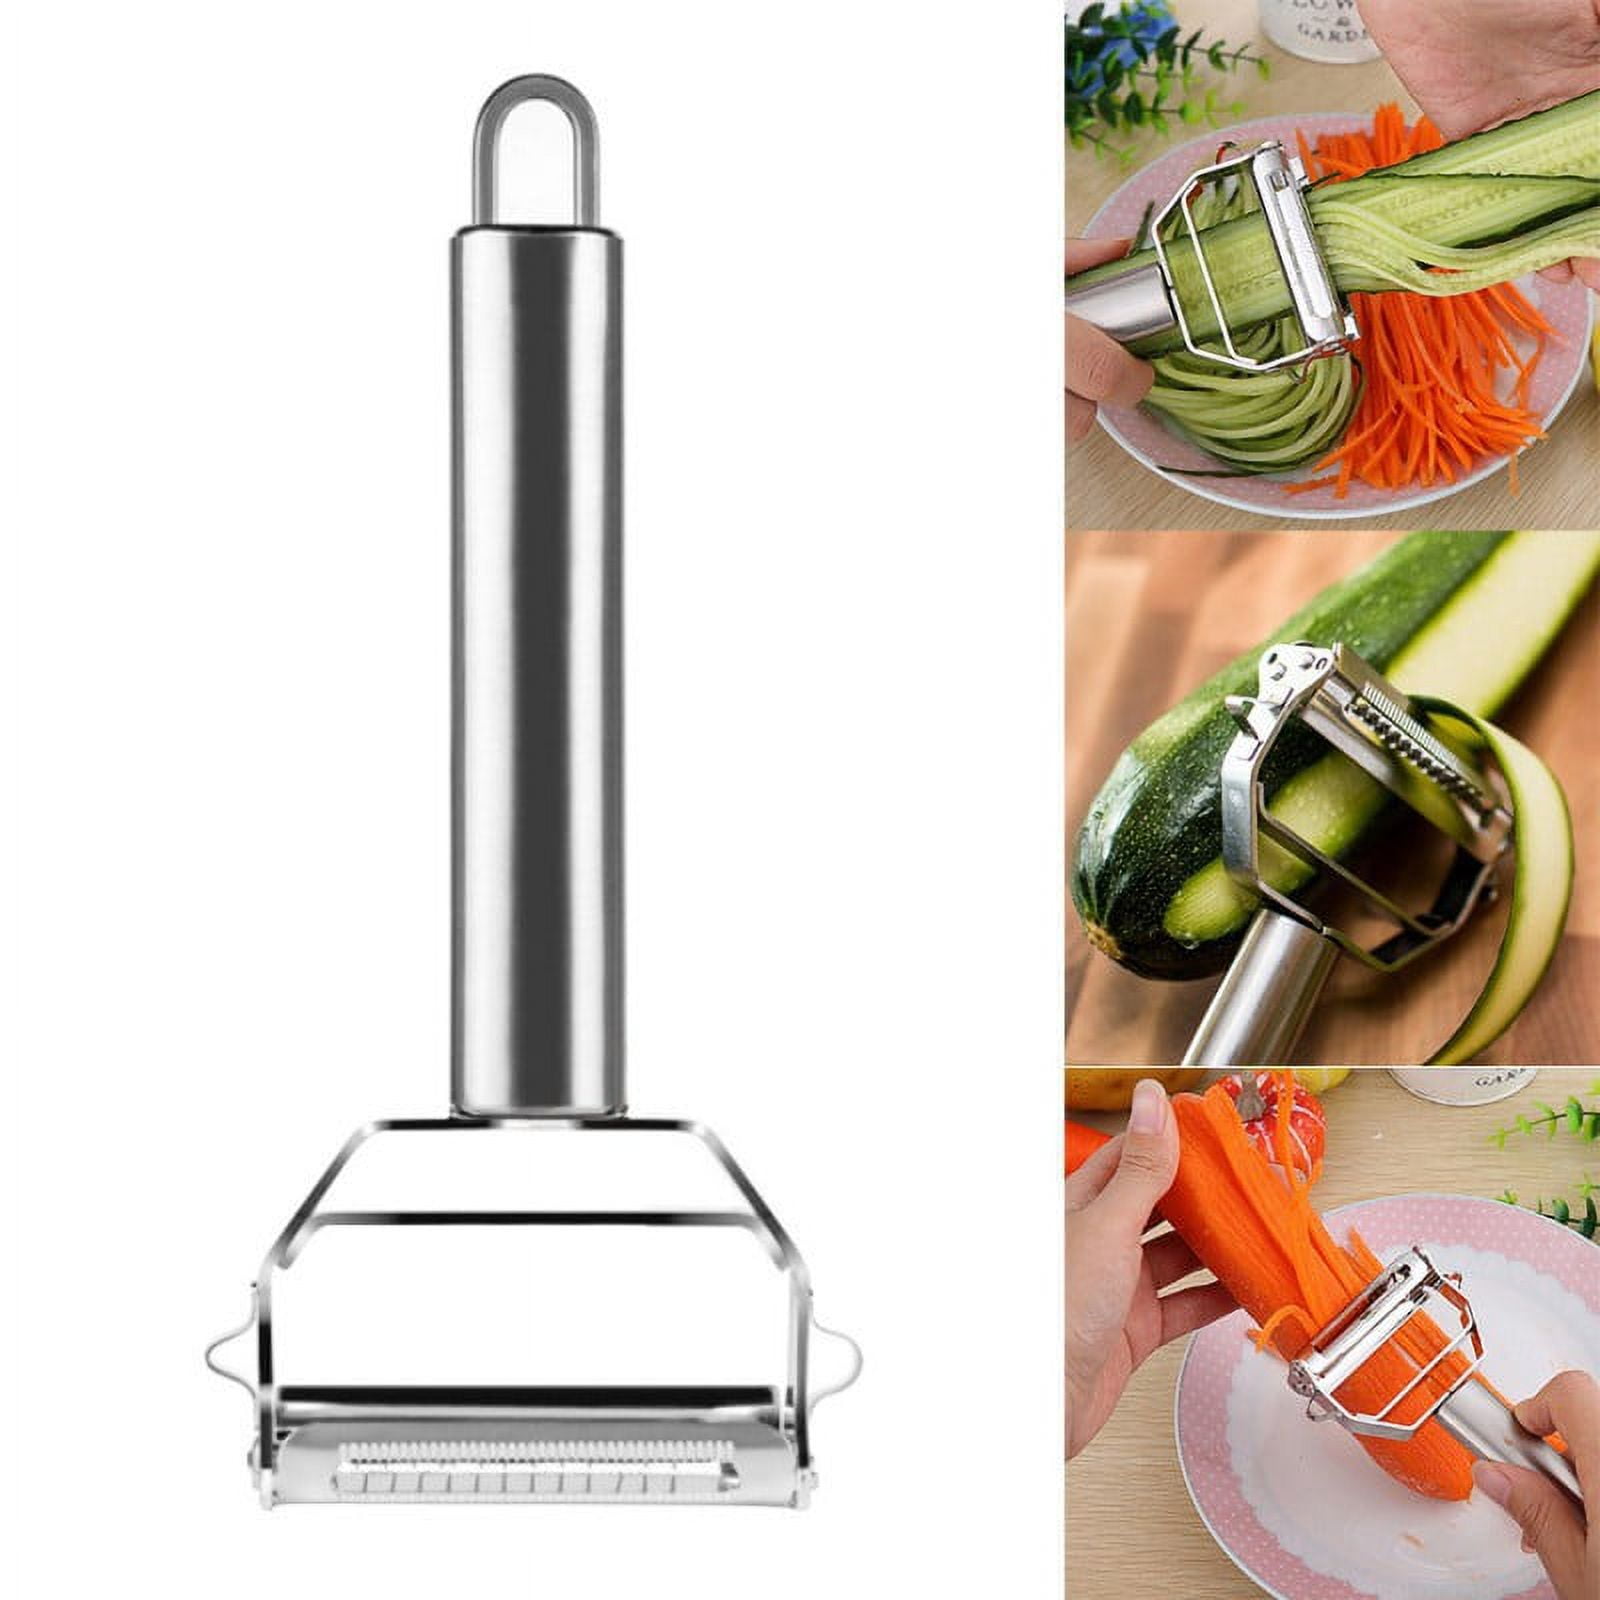  Kitchen Food Peeler,Vegetable Peeler,Stainless Steel Blades  with Non-Slip Handles Peeler for Potatoes/Carrots/Apples/Oranges/Cabbage  and Other Vegetables & Fruits(Set of 3): Home & Kitchen